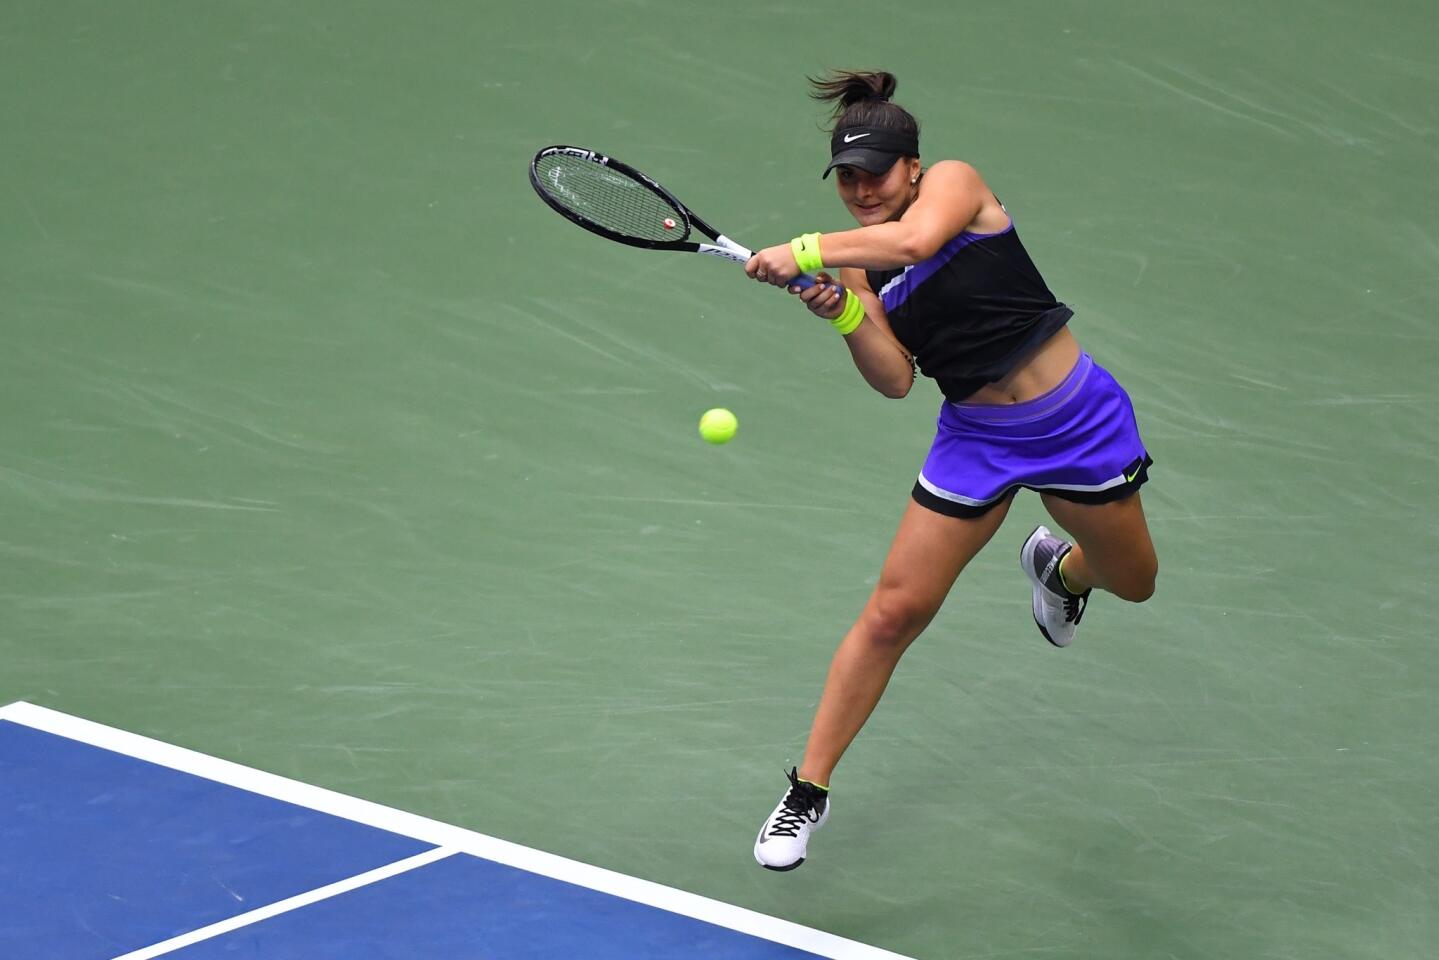 Bianca Andreescu returns a shot during her Women's Singles final match against Serena Williams inside the Billie Jean King National Tennis Center on Sept. 7, 2019, in Queens.